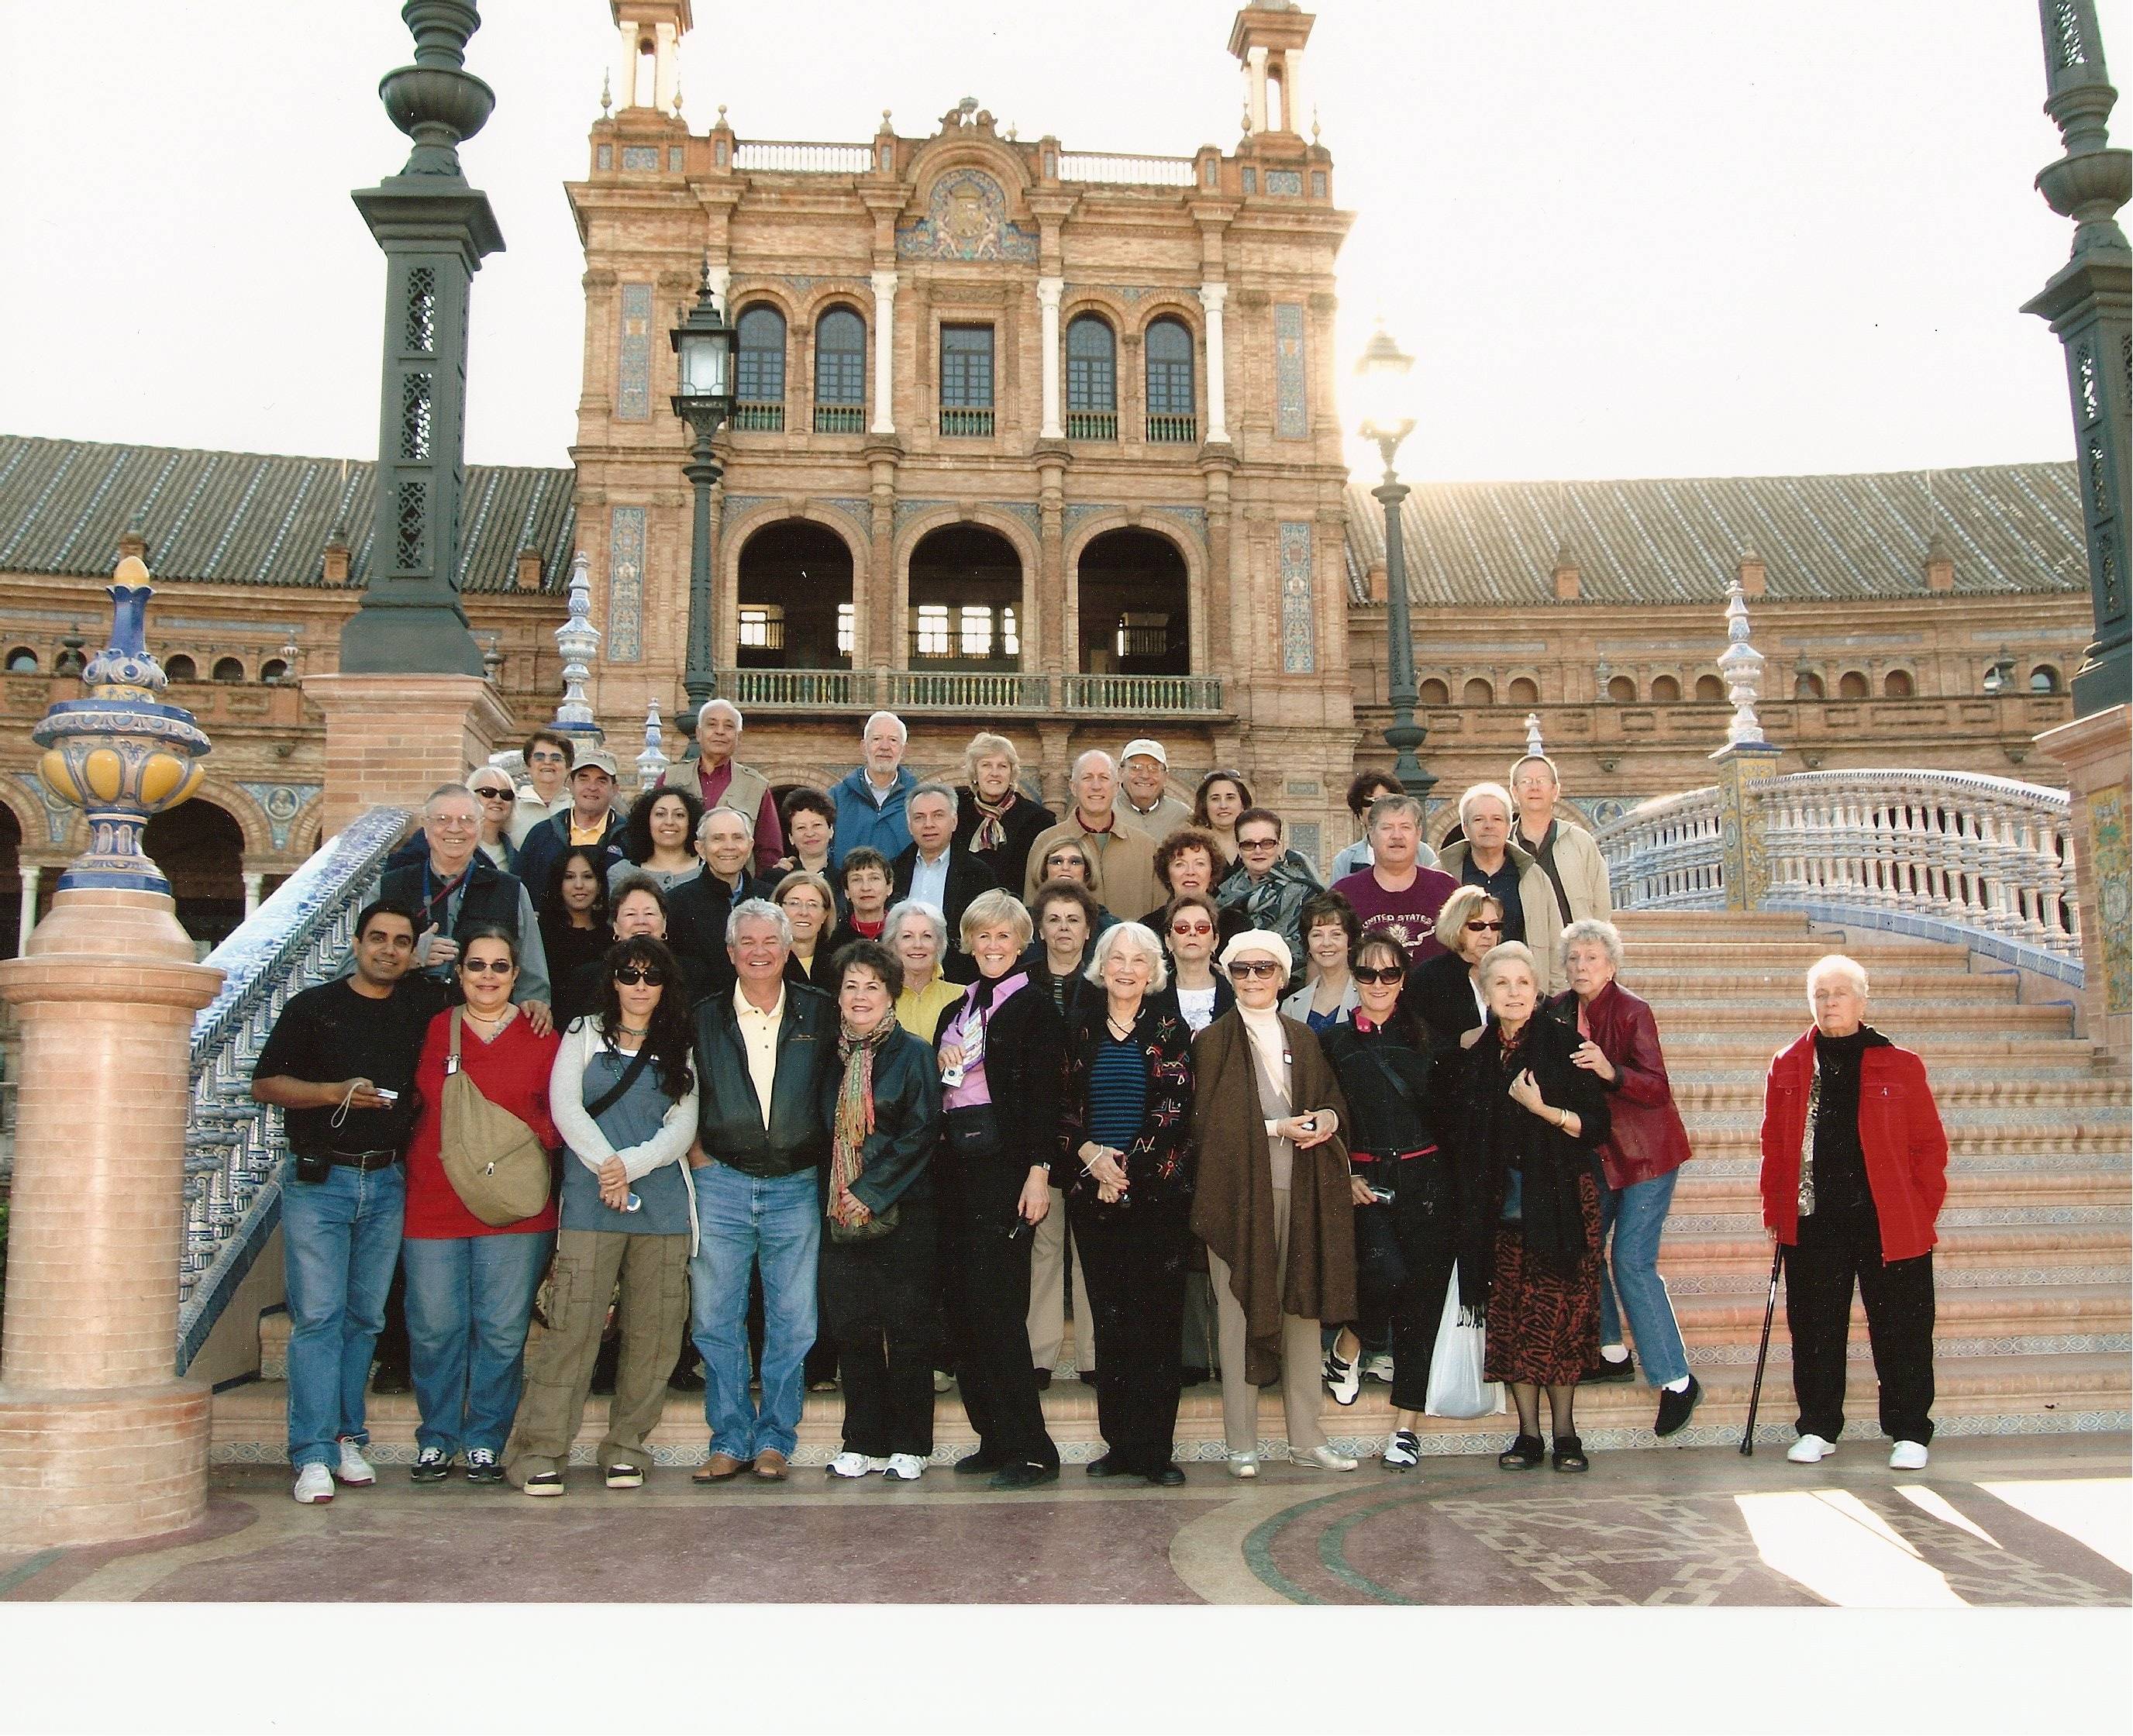 Here is our GLOBUS group of touring friends in Sevilla.